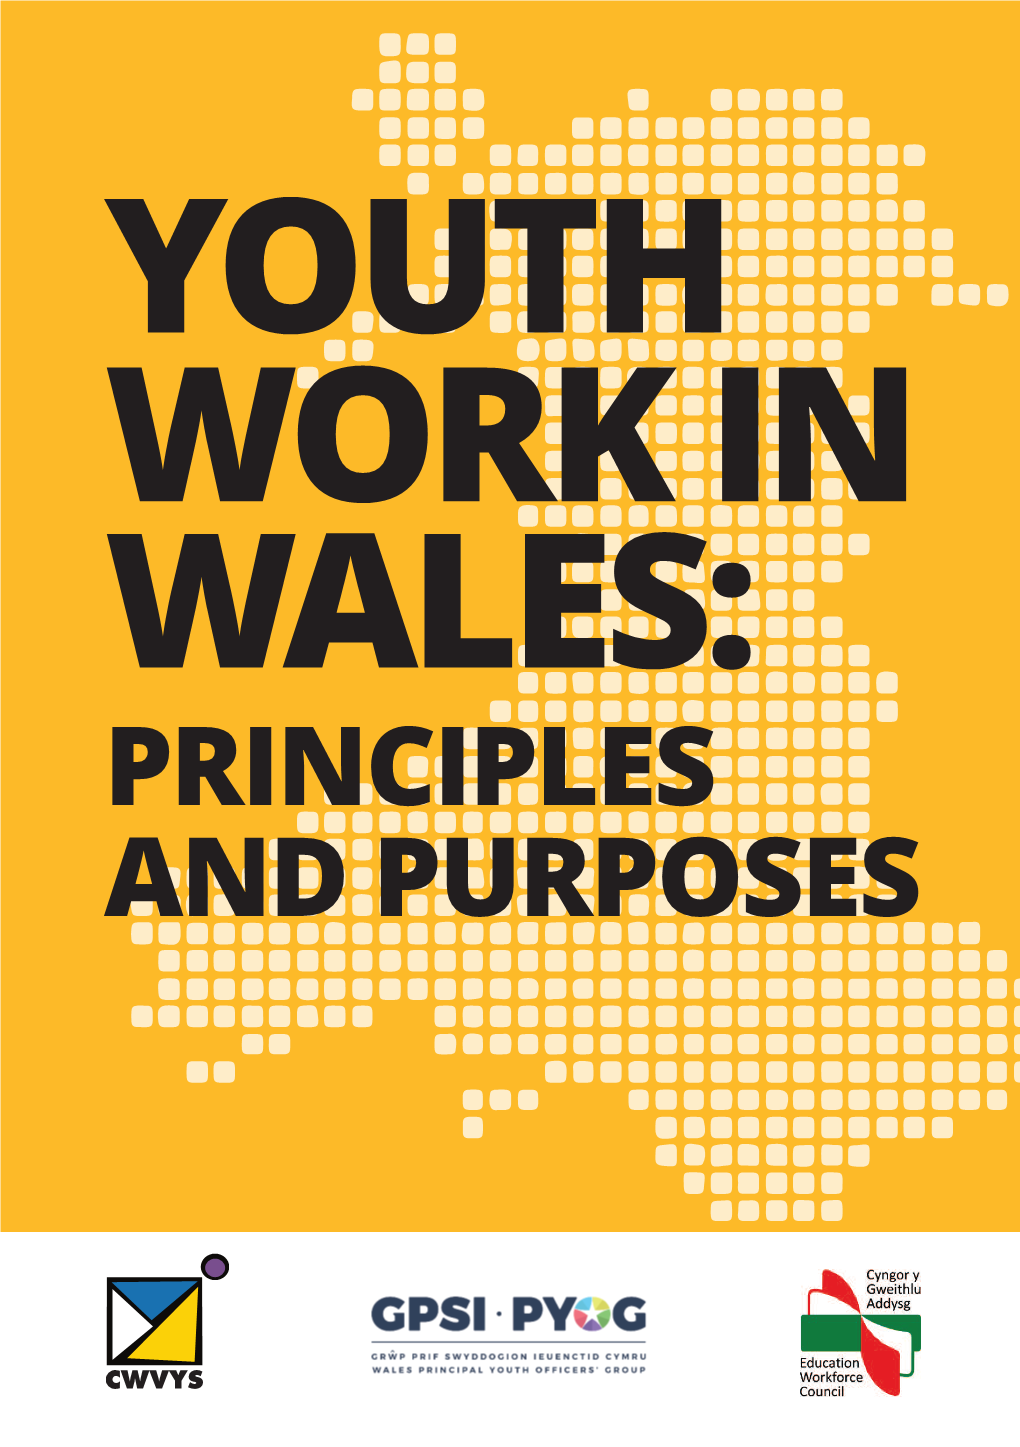 Youth Work in Wales: Principles and Purposes Introduction